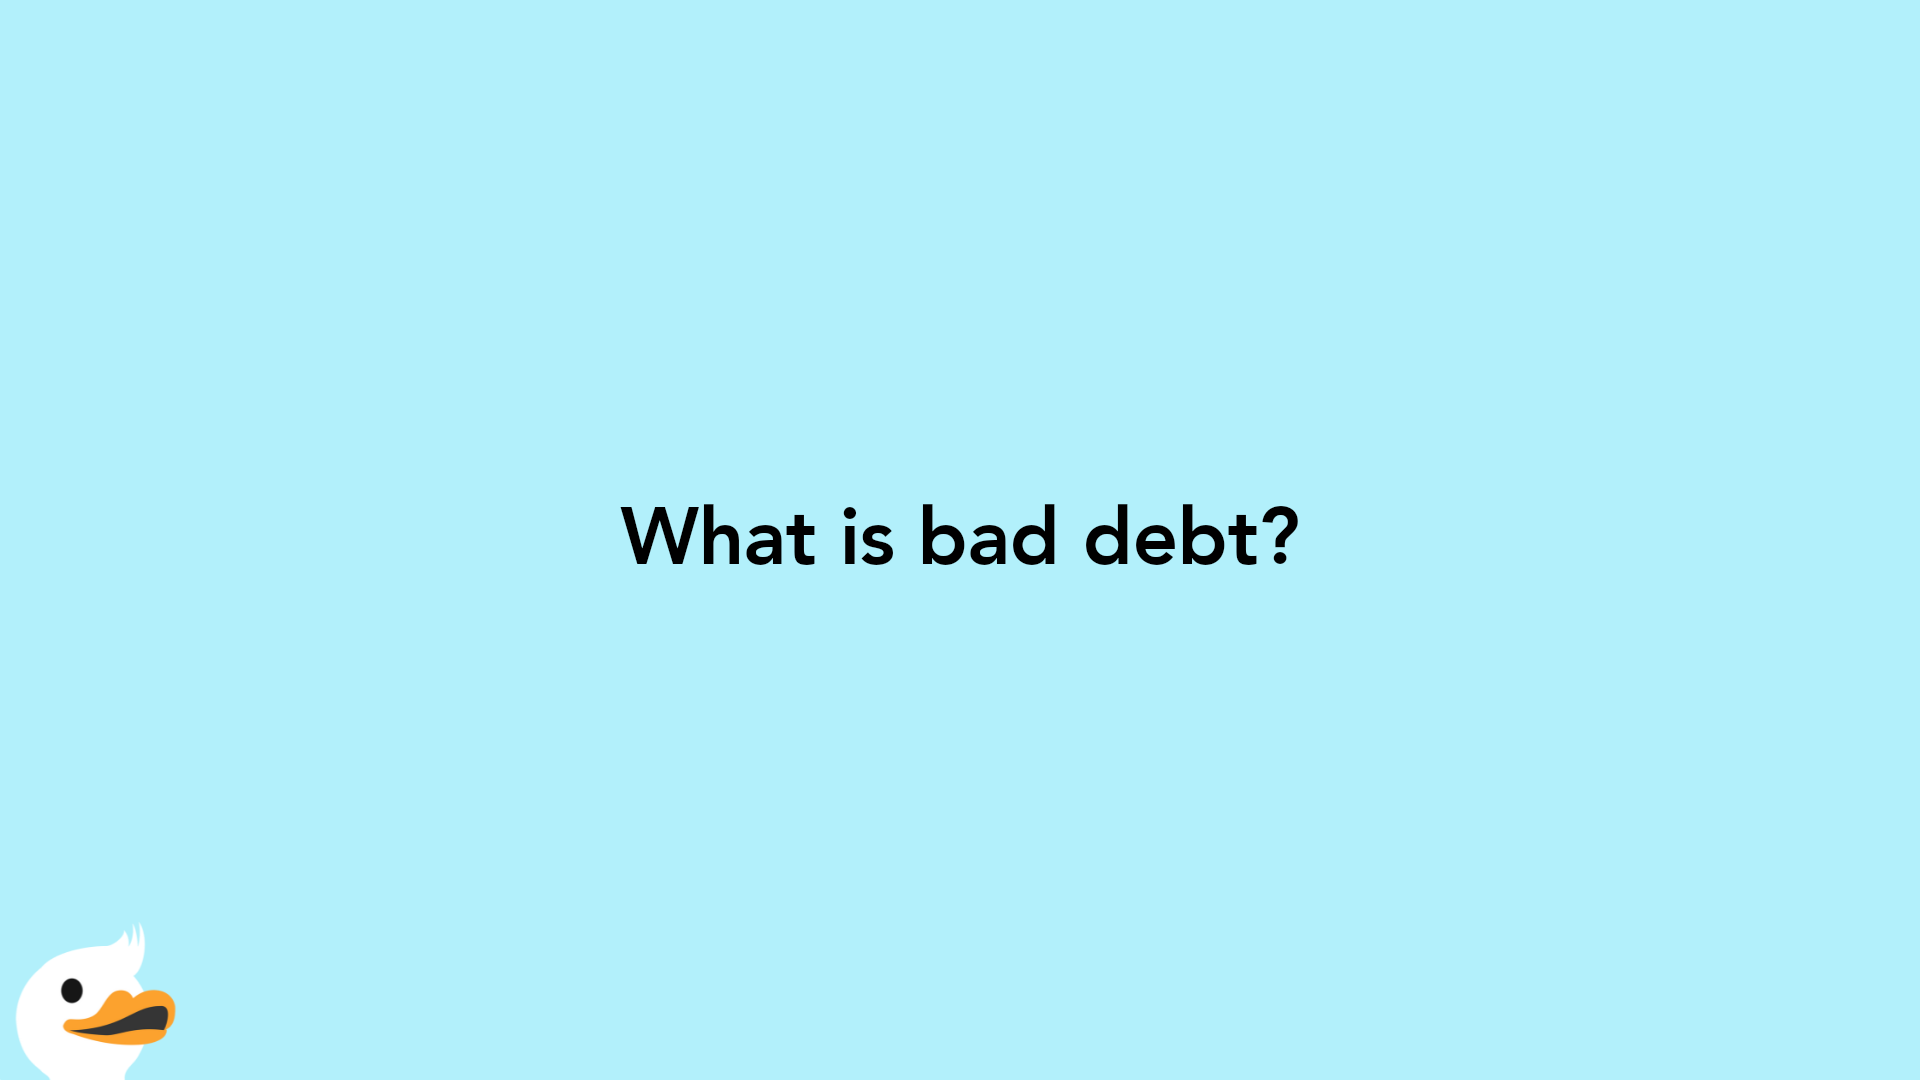 What is bad debt?